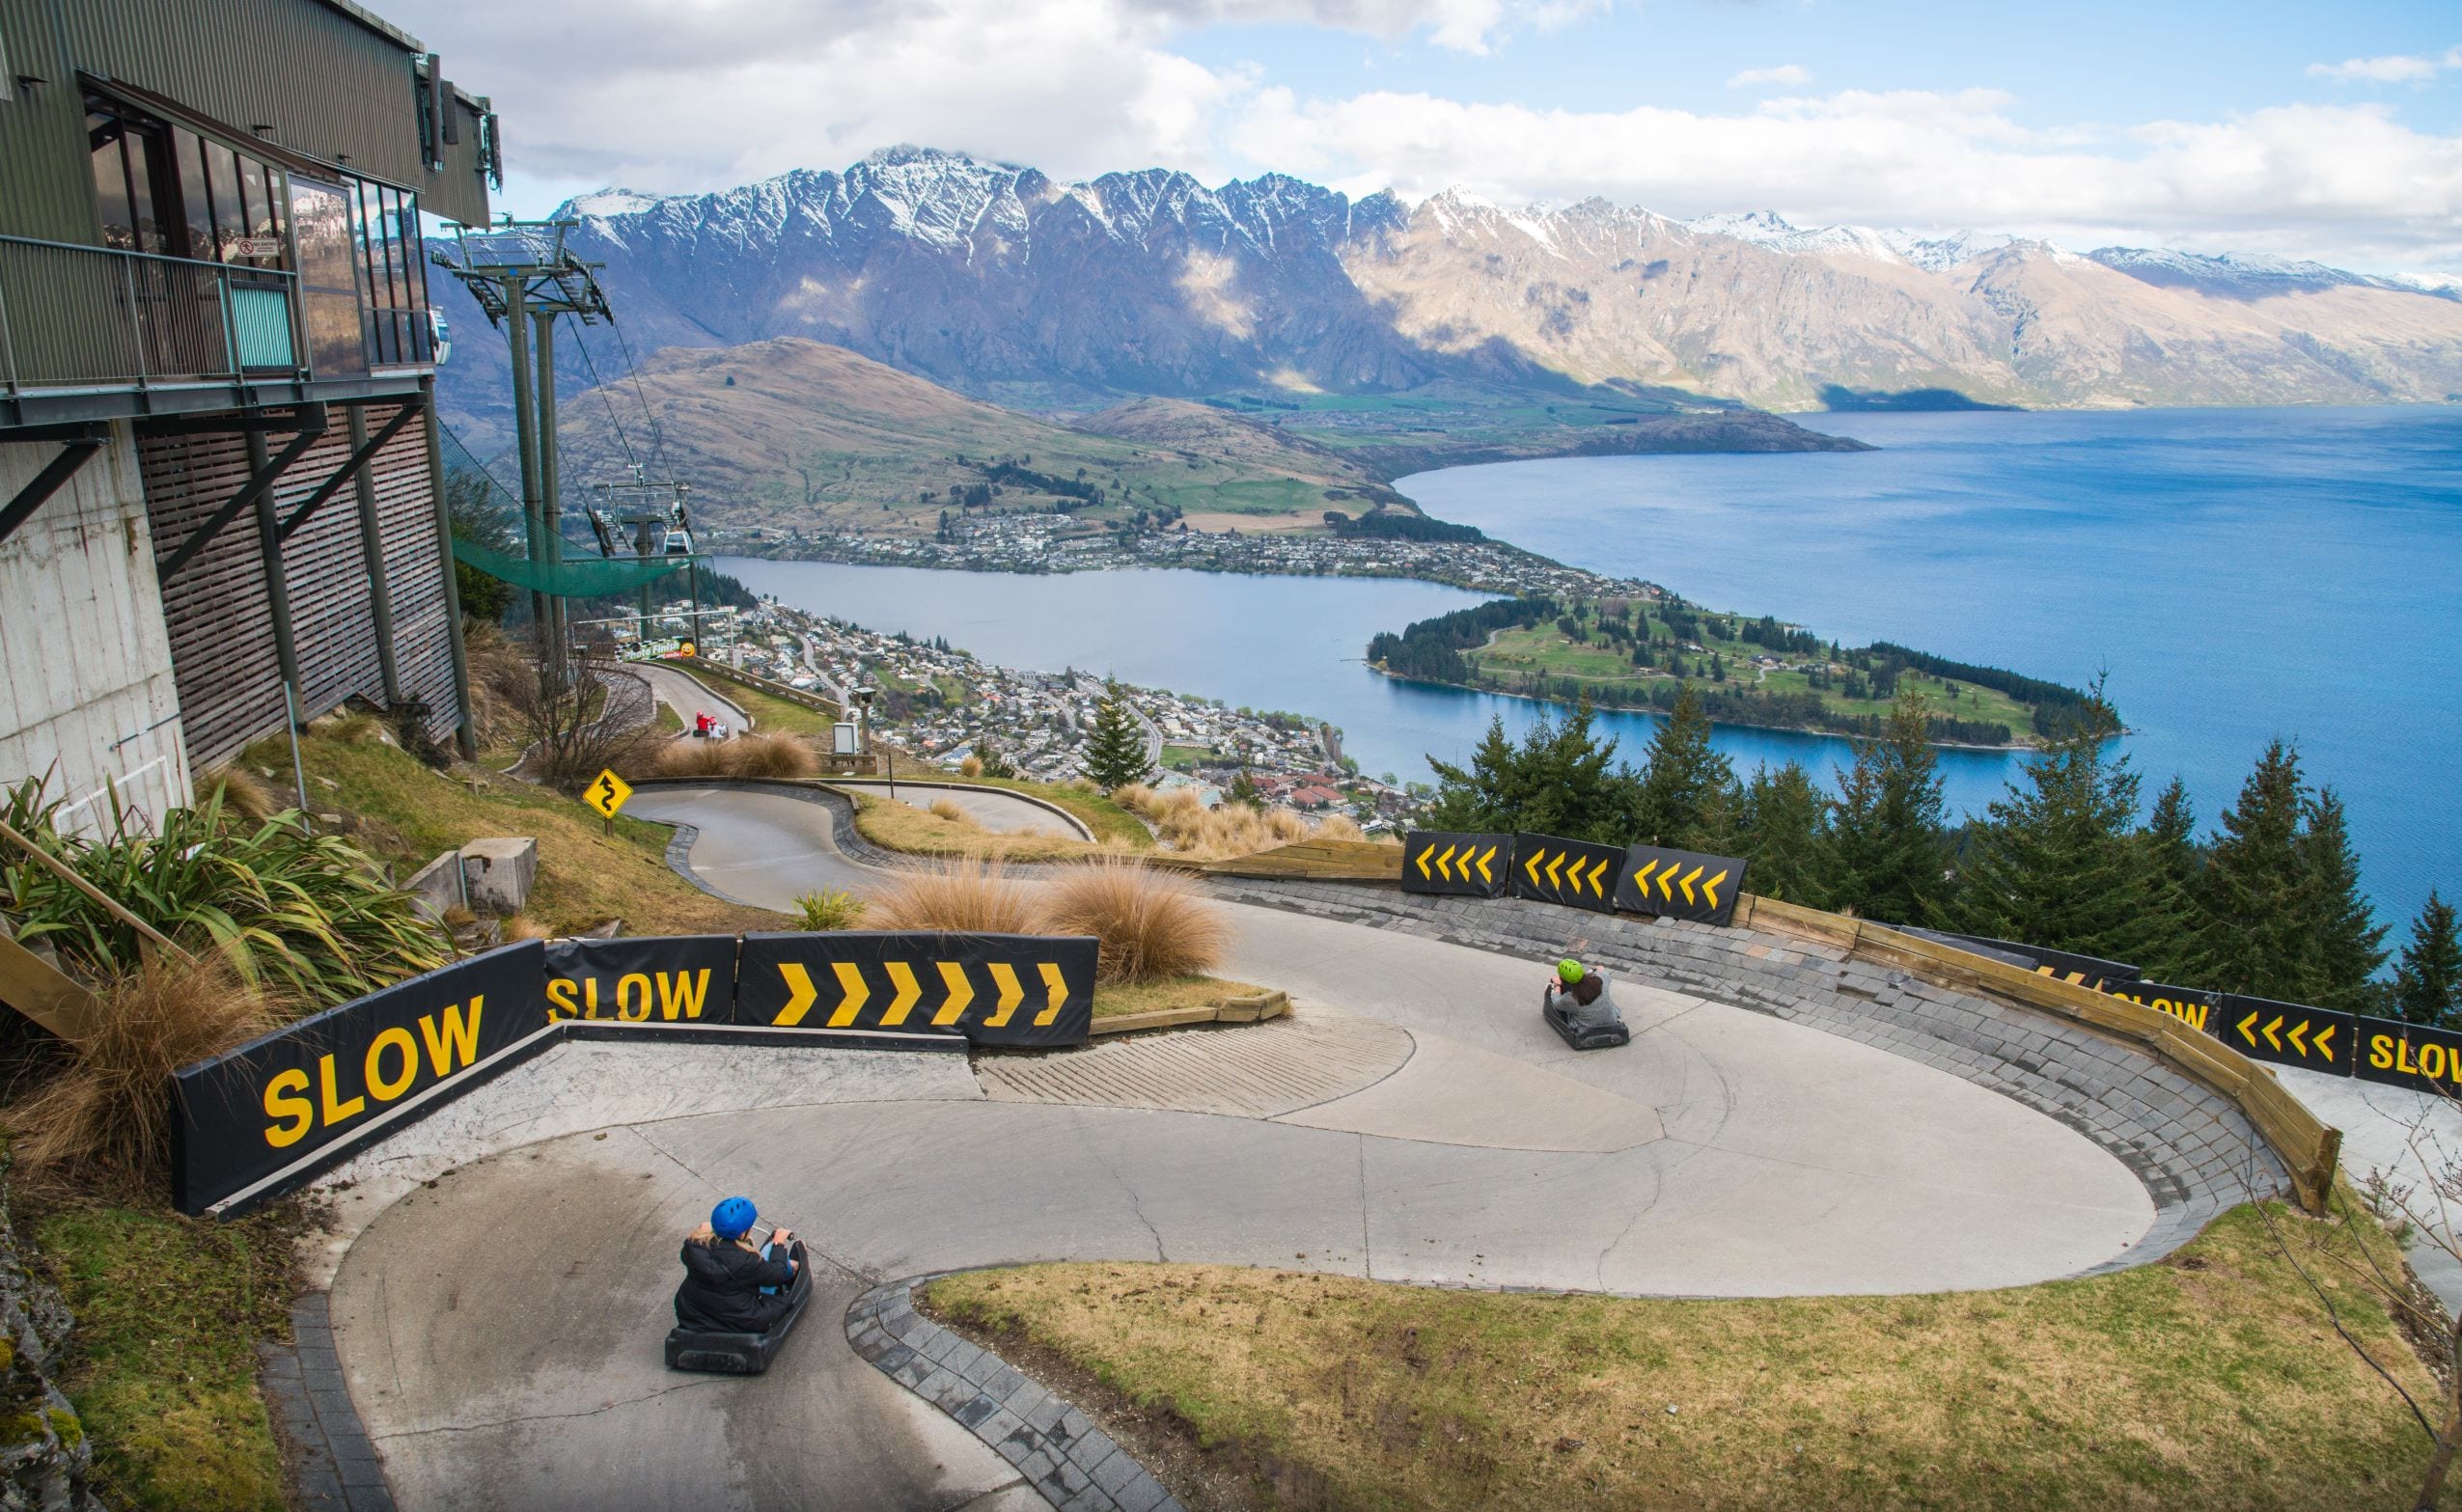 Things to do in Queenstown with kids